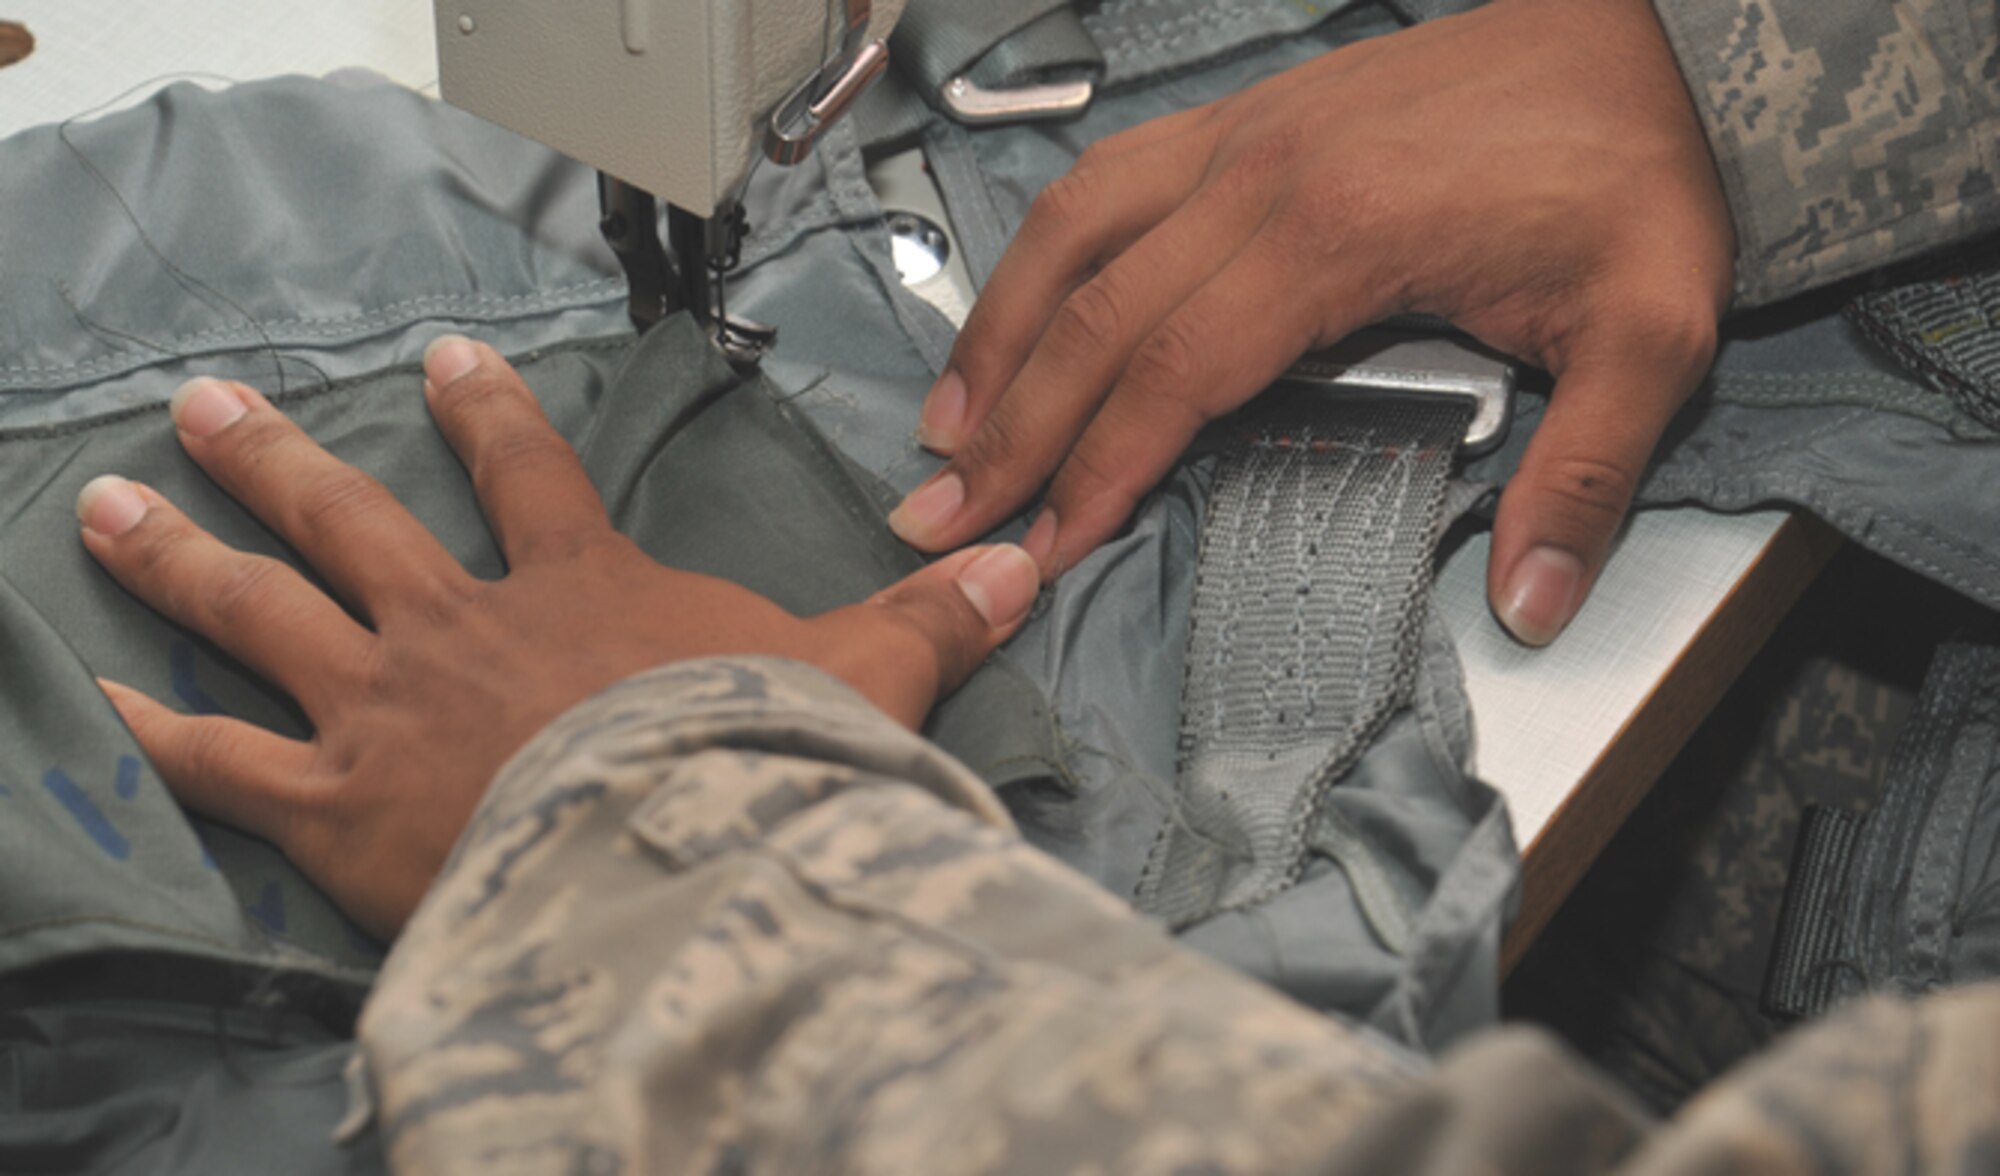 Senior Airman Kyle Boddie, 92nd Operations Support Squadron aircrew flight equipment journeyman, sews a pocket to a restrain harness July 7, 2016, at Fairchild Air Force Base, Wash. He was recently selected for the Thunderbirds team. (U.S. Air Force photo/Staff Sgt. Samantha Krolikowski)